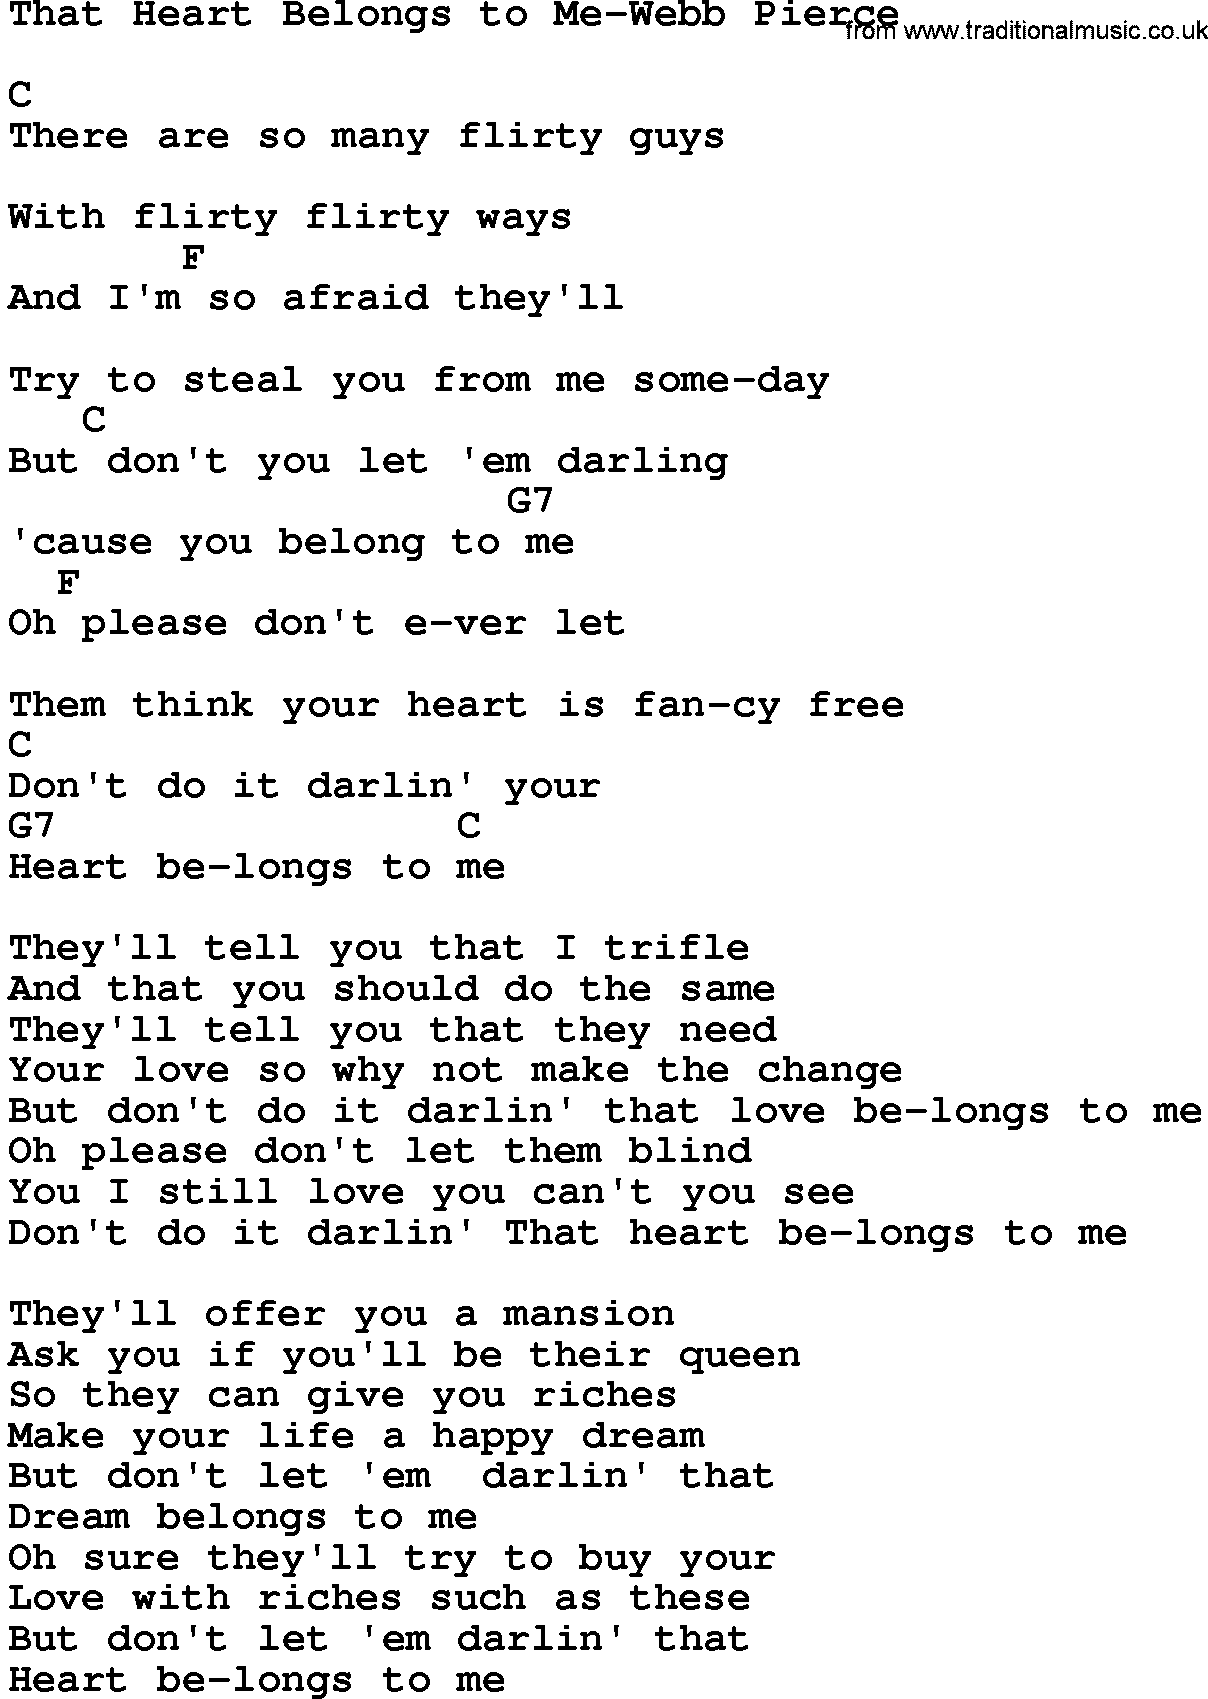 Country music song: That Heart Belongs To Me-Webb Pierce lyrics and chords